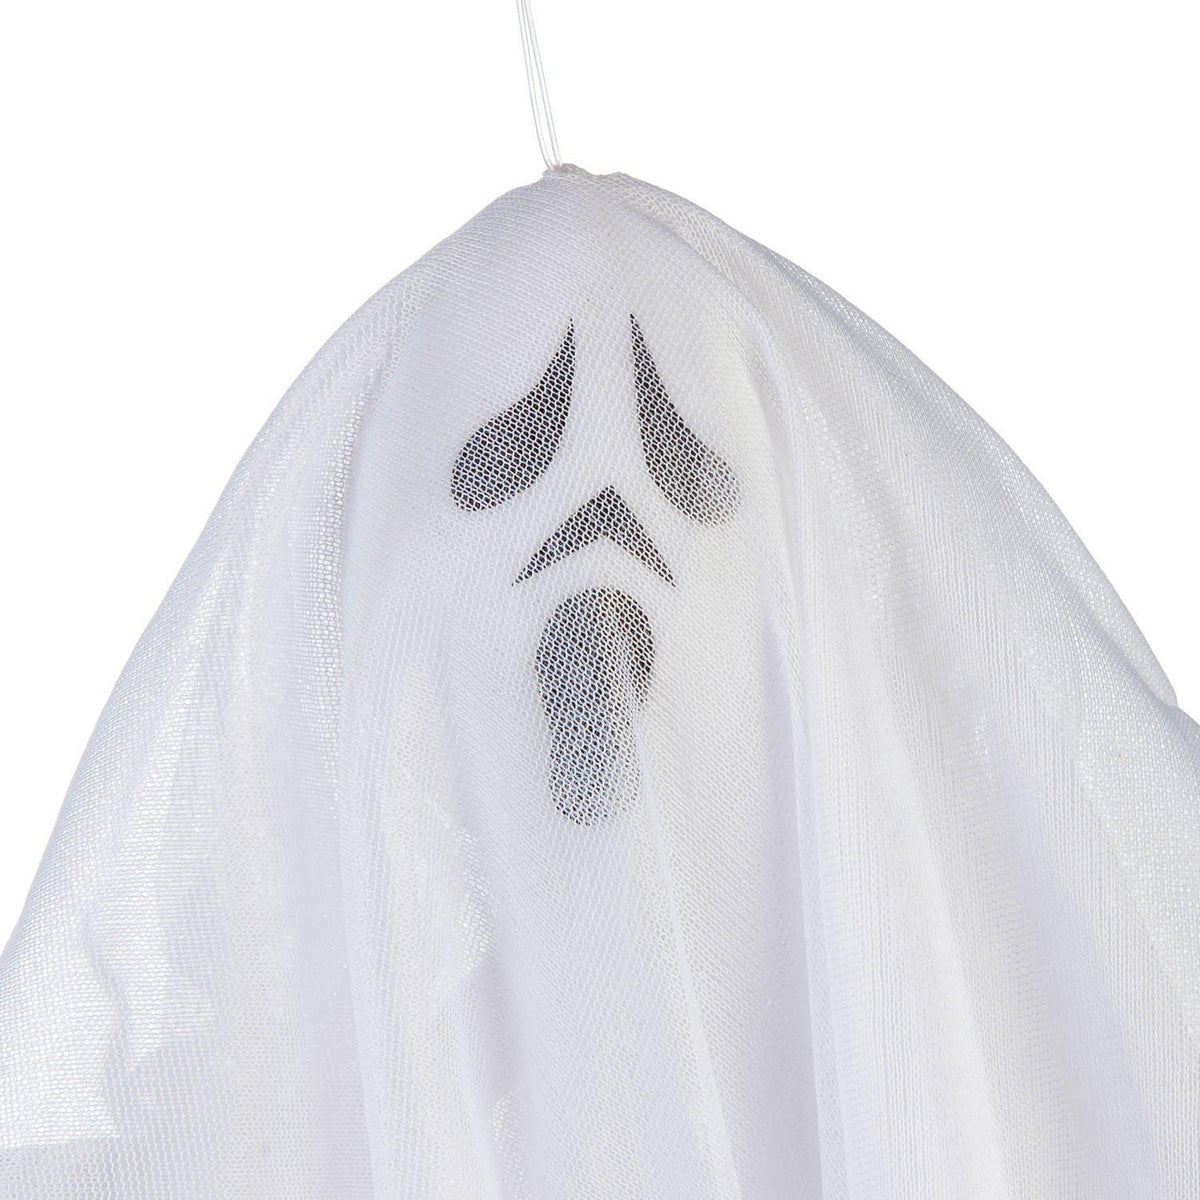 Add a little spookiness to your Halloween decorations with this trio of hanging ghosts. Each ghost features a different expression and can be hung by the attached string so they appear to float through the air.